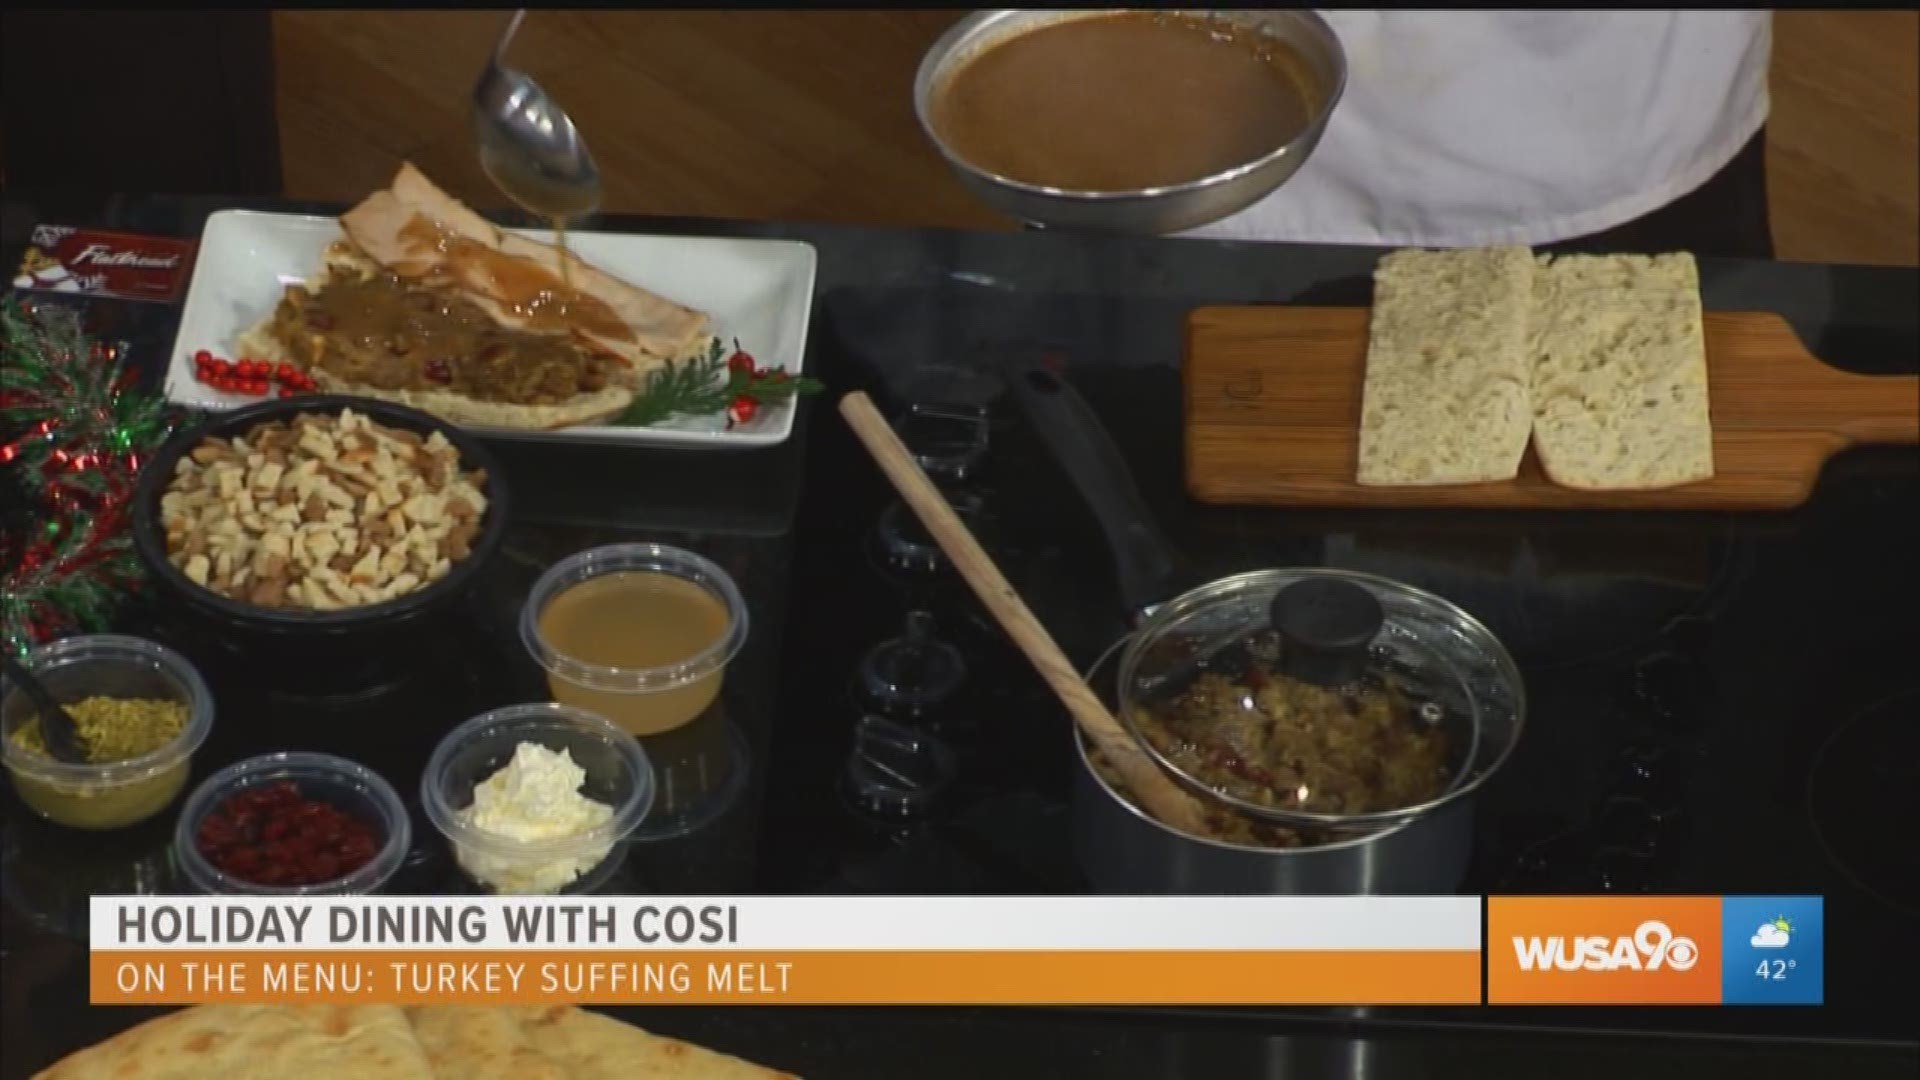 Cosi's Vinnie DiNatale, director of marketing and Marcos Rodriguez, director of culinary services chat about holiday catering and their staple turkey stuffing melt!